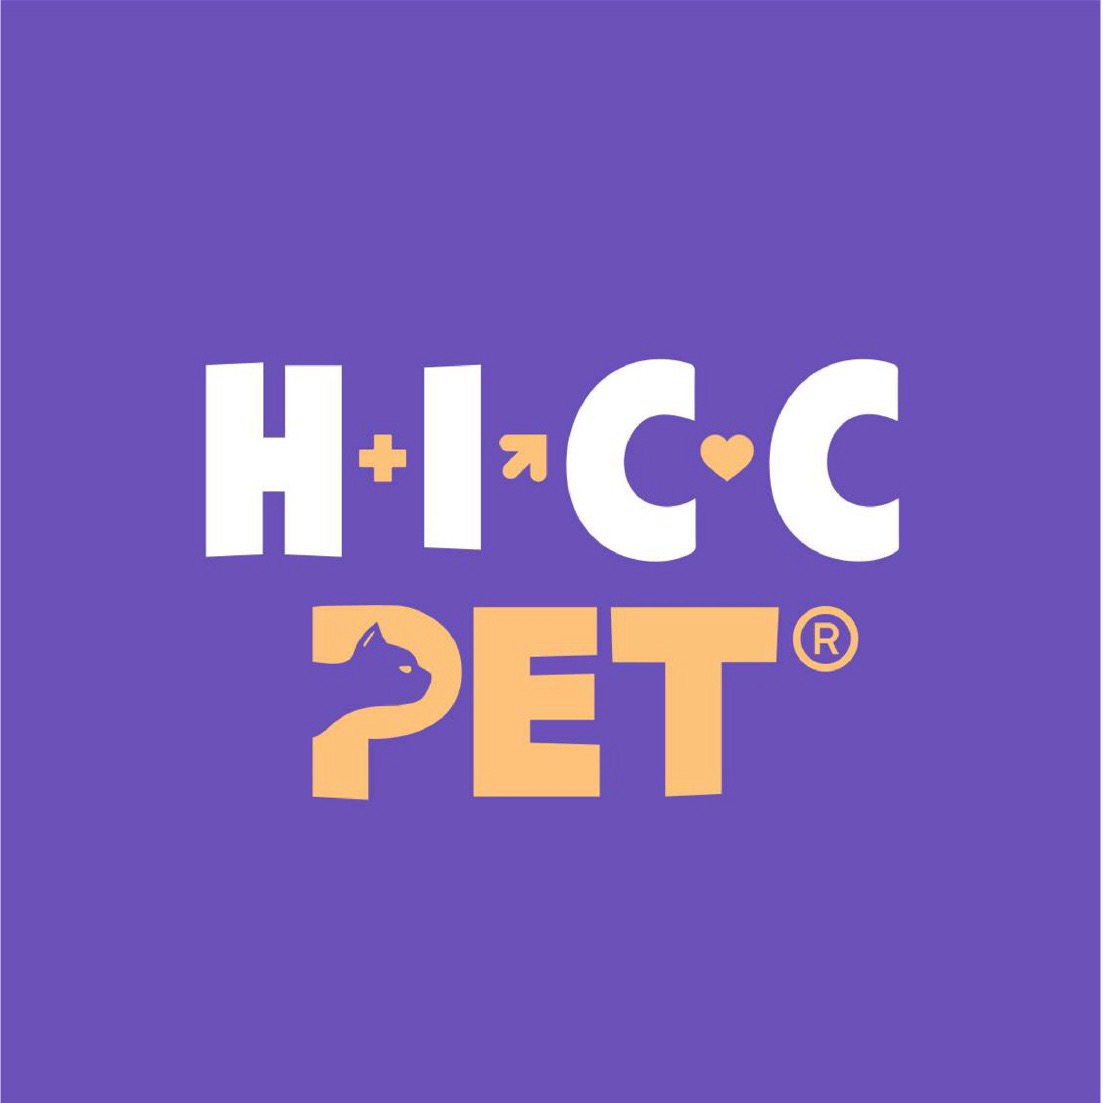 Company logo for Hicc Pte. Ltd.